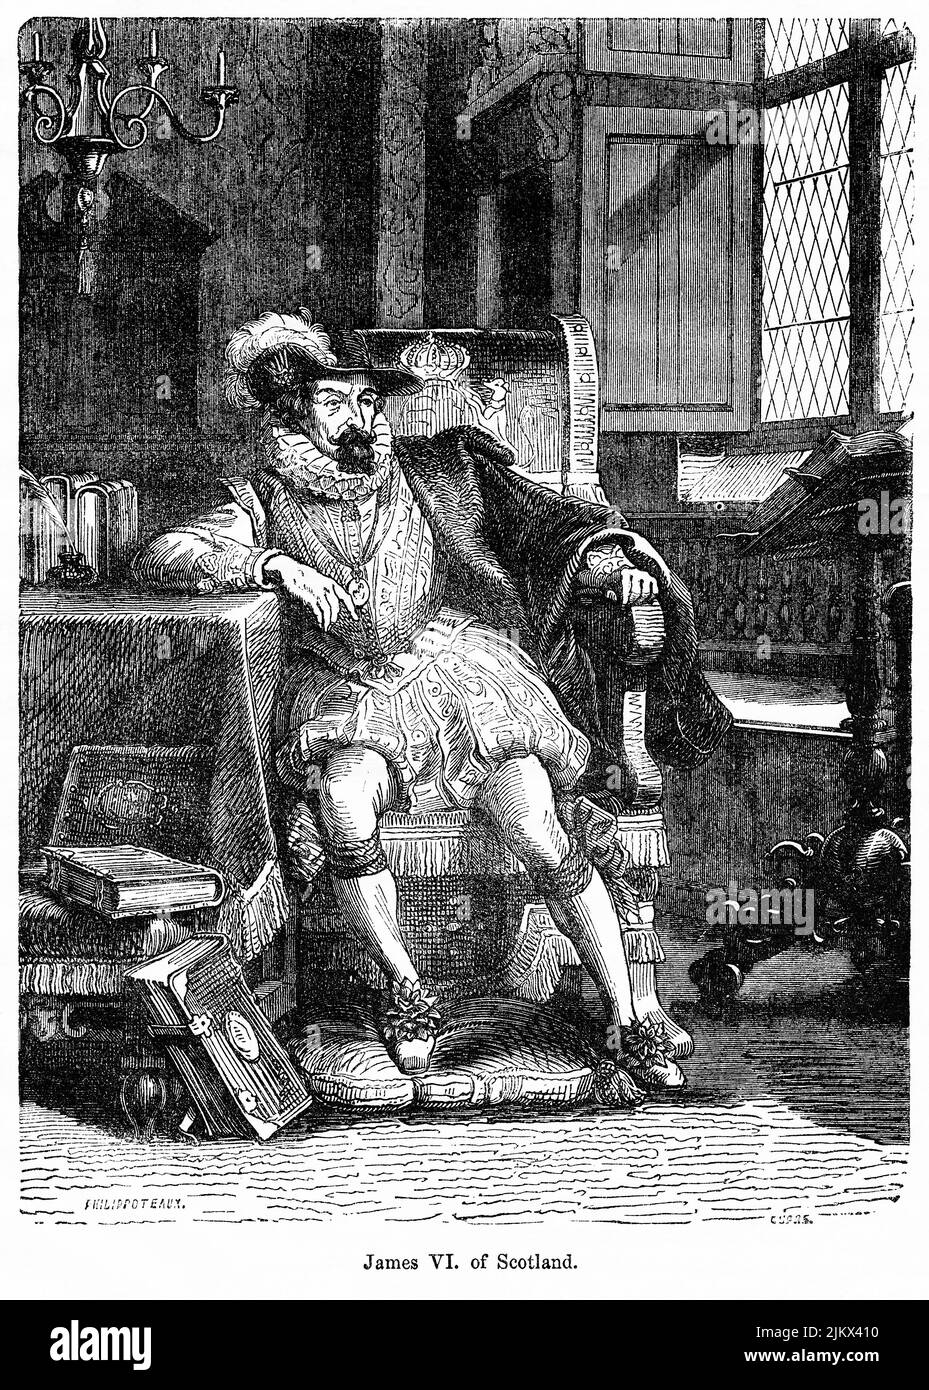 James VI of Scotland, Illustration from the Book, 'John Cassel’s Illustrated History of England, Volume II', text by William Howitt, Cassell, Petter, and Galpin, London, 1858 Stock Photo